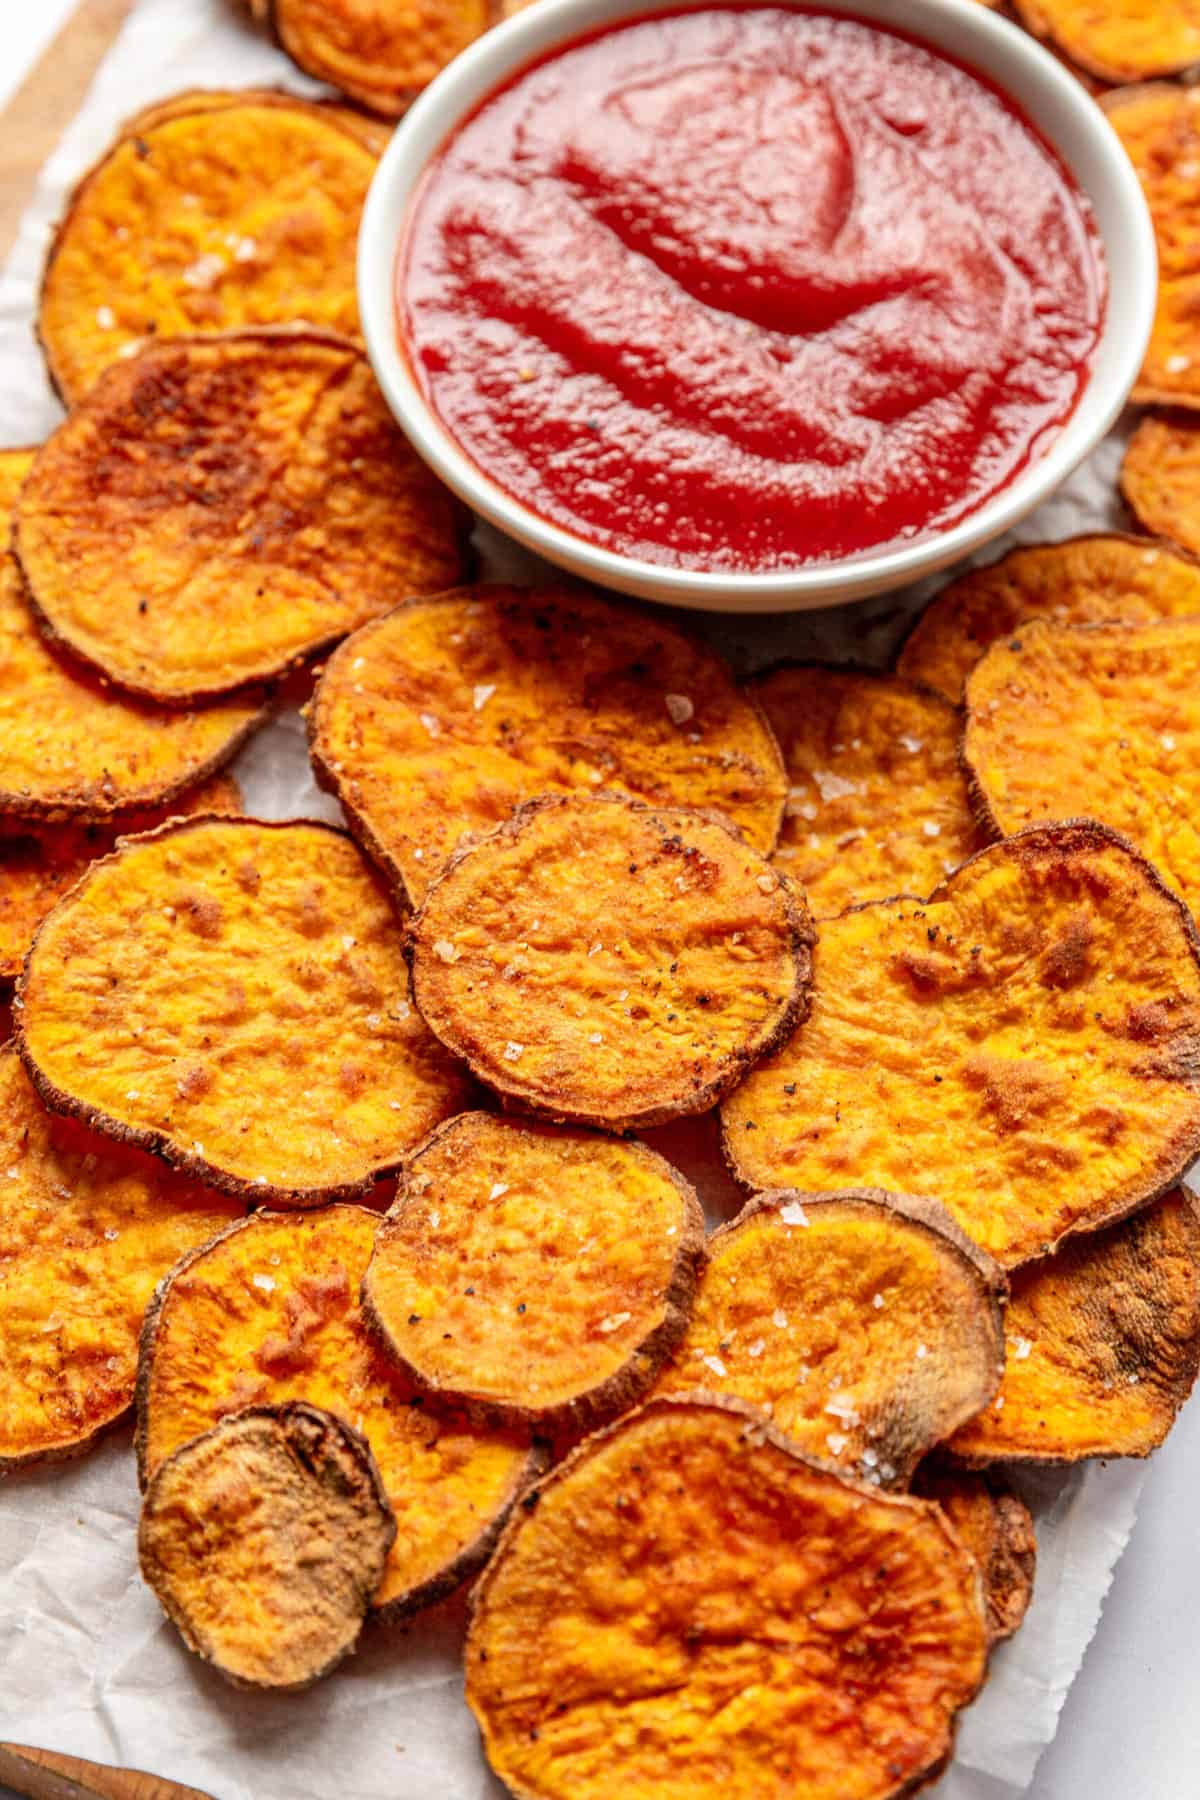 close up image of air fryer sweet potato chips sitting on parchment paper with a side of ketchup in a white round bowl.